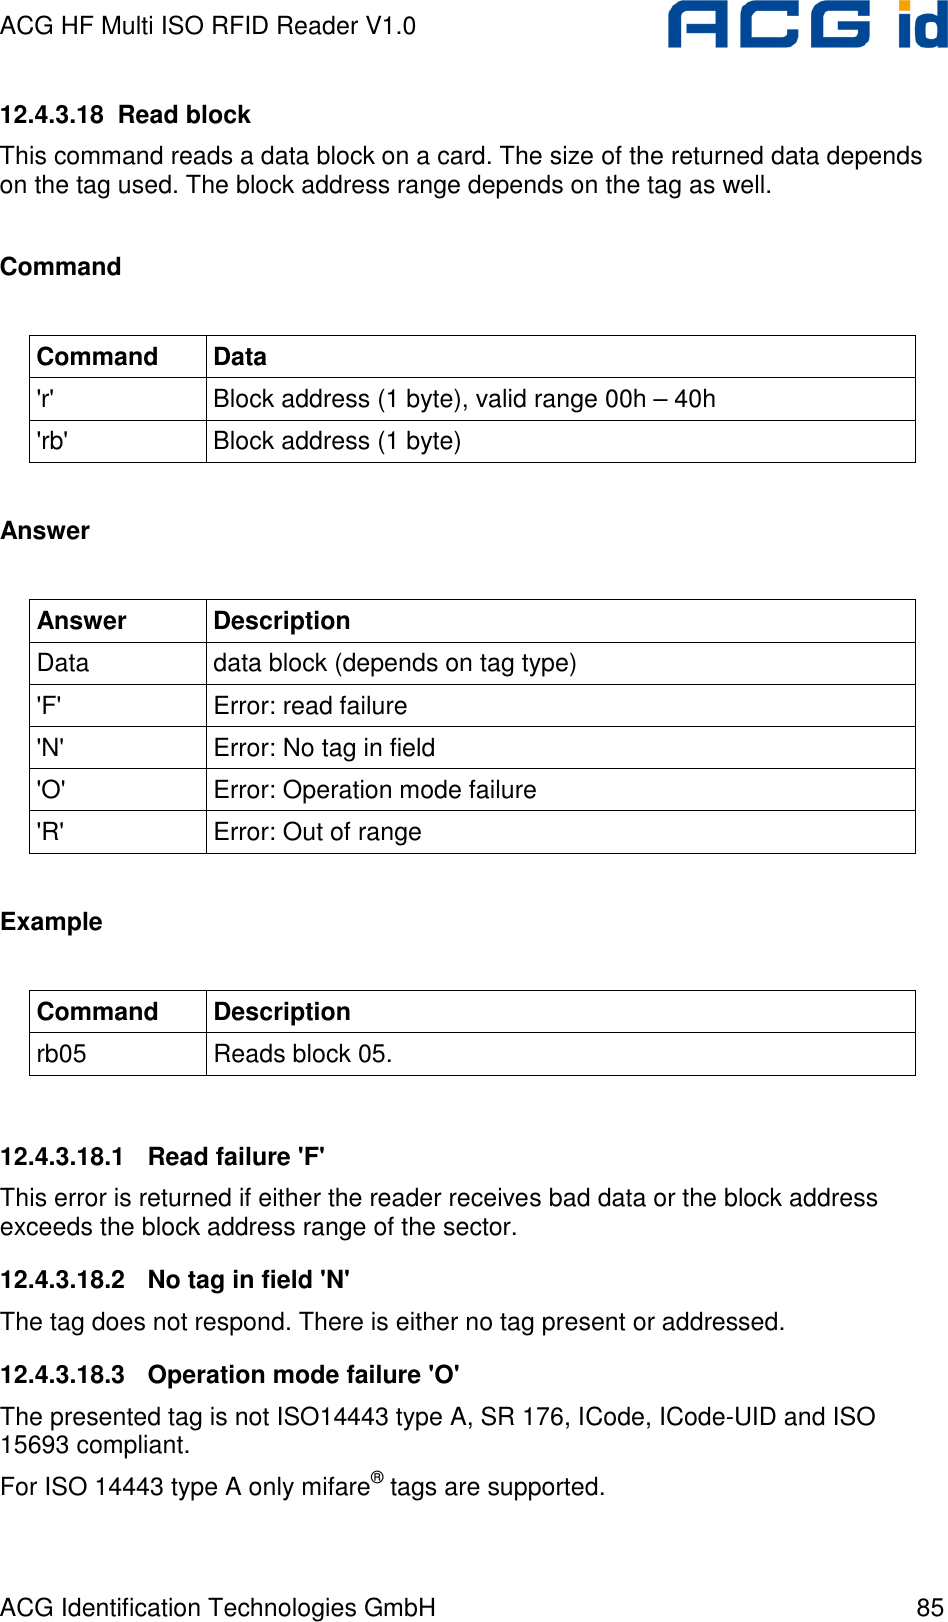 ACG HF Multi ISO RFID Reader V1.0 ACG Identification Technologies GmbH  85 12.4.3.18  Read block This command reads a data block on a card. The size of the returned data depends on the tag used. The block address range depends on the tag as well.  Command  Command  Data &apos;r&apos;  Block address (1 byte), valid range 00h – 40h &apos;rb&apos;  Block address (1 byte)  Answer  Answer  Description Data  data block (depends on tag type) &apos;F&apos;  Error: read failure &apos;N&apos;  Error: No tag in field &apos;O&apos;  Error: Operation mode failure &apos;R&apos;  Error: Out of range  Example  Command  Description rb05  Reads block 05.  12.4.3.18.1  Read failure &apos;F&apos; This error is returned if either the reader receives bad data or the block address exceeds the block address range of the sector. 12.4.3.18.2  No tag in field &apos;N&apos; The tag does not respond. There is either no tag present or addressed. 12.4.3.18.3  Operation mode failure &apos;O&apos; The presented tag is not ISO14443 type A, SR 176, ICode, ICode-UID and ISO 15693 compliant. For ISO 14443 type A only mifare® tags are supported. 